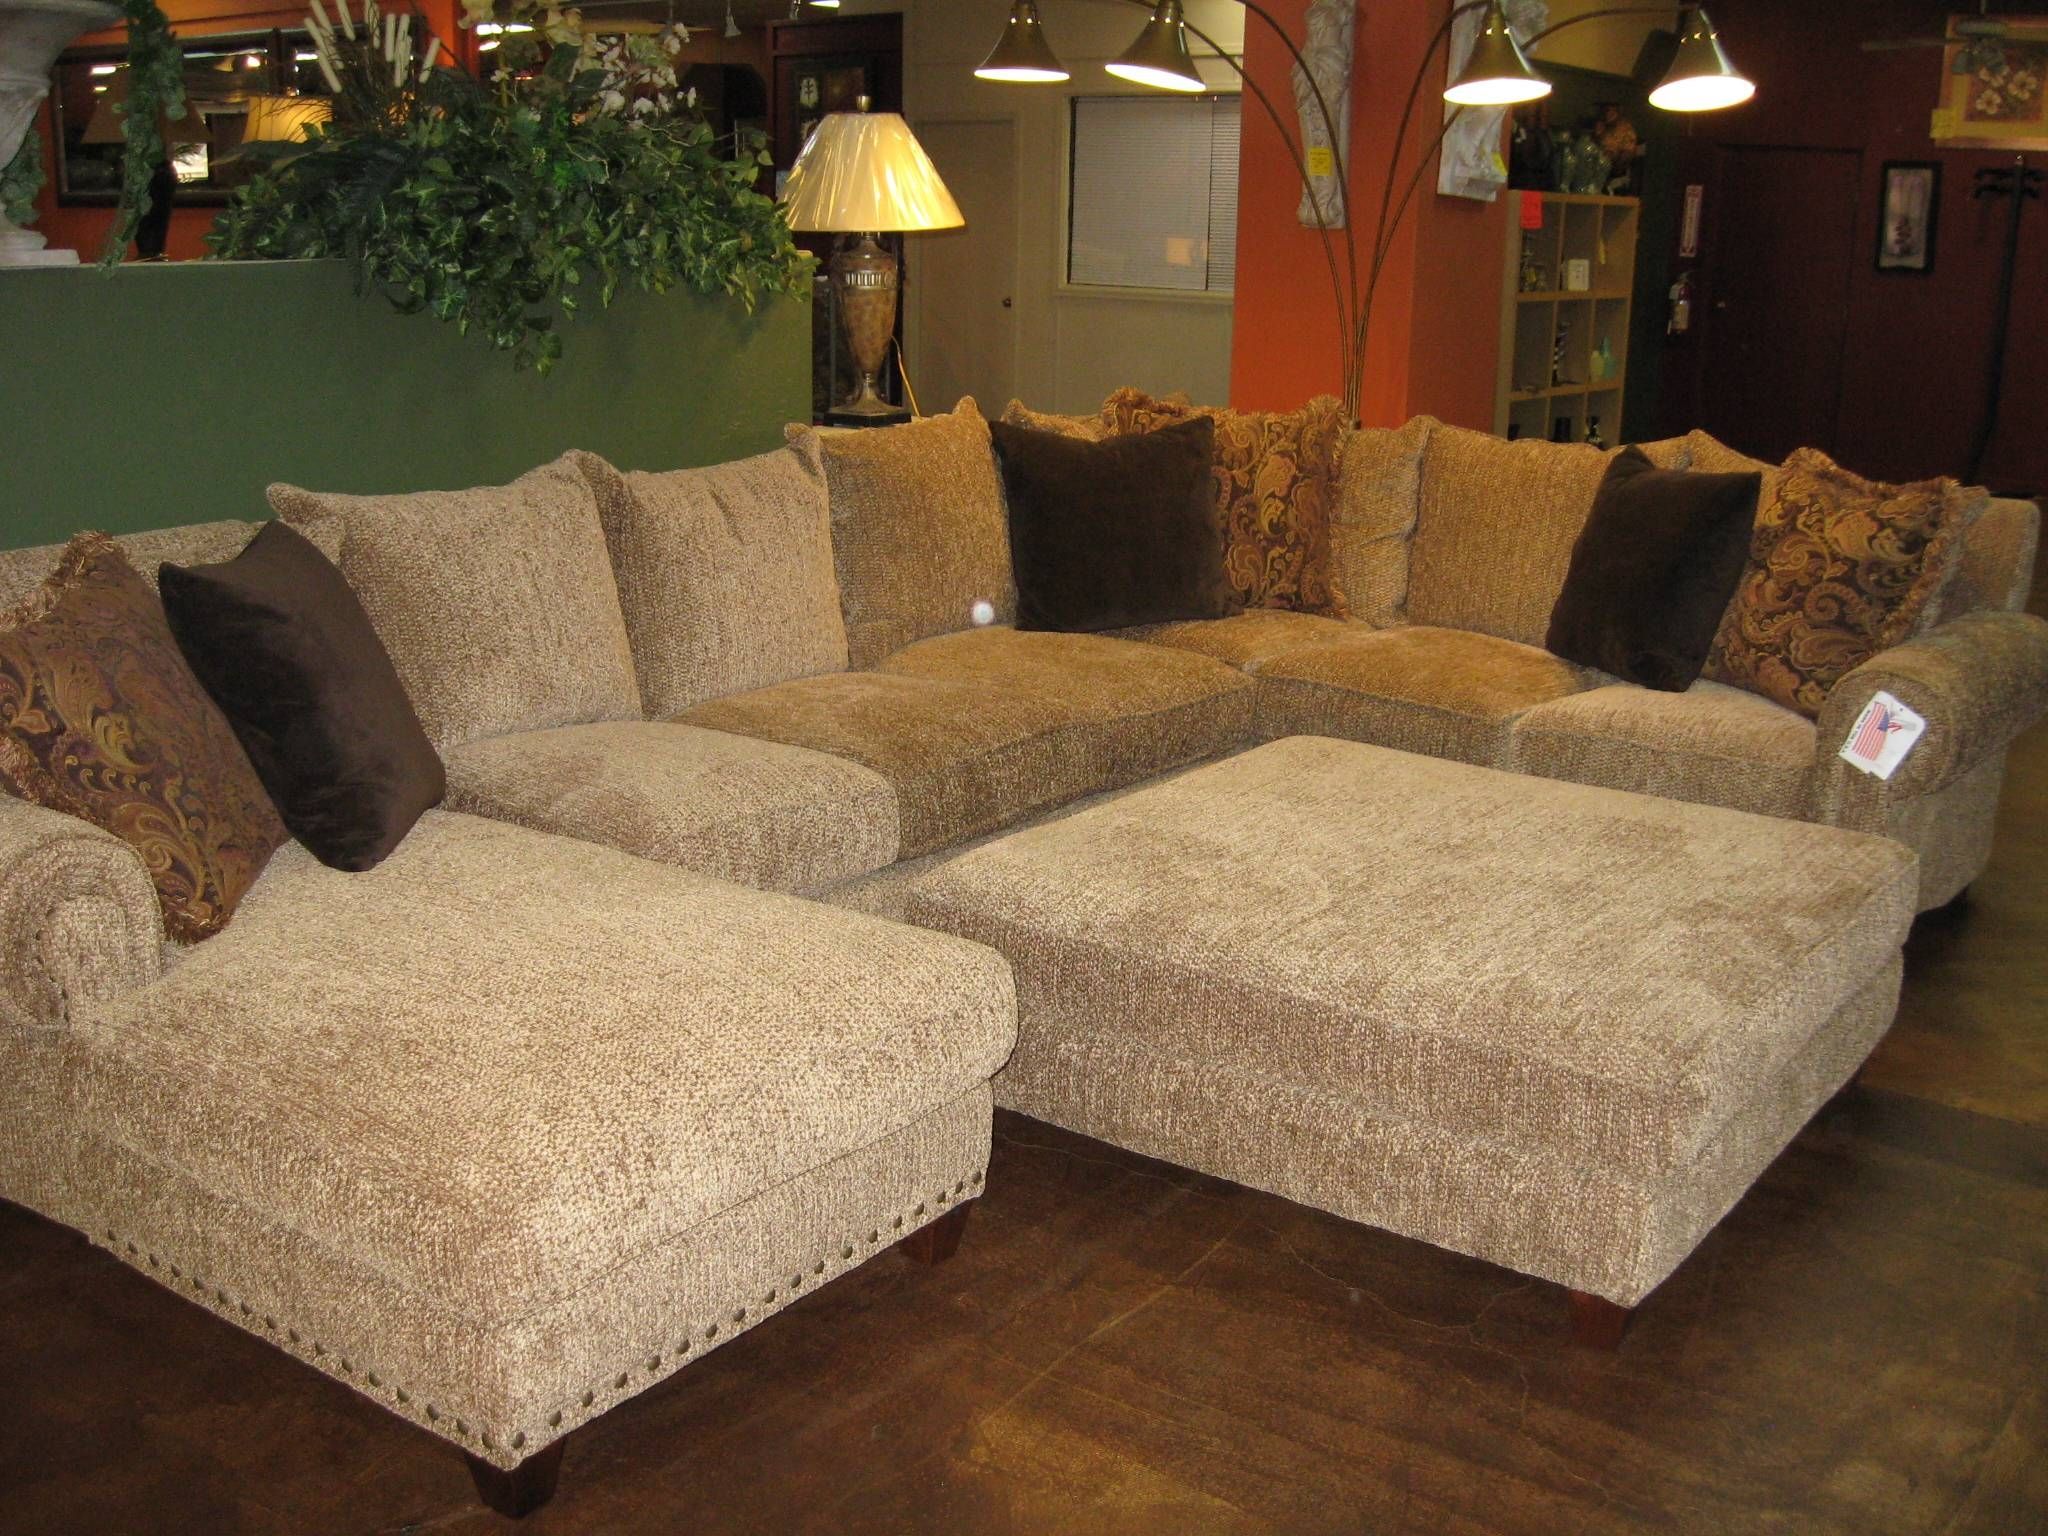 Awesome Sectional Sofa With Large Ottoman 81 For Backless Throughout Backless Sectional Sofa (View 9 of 30)